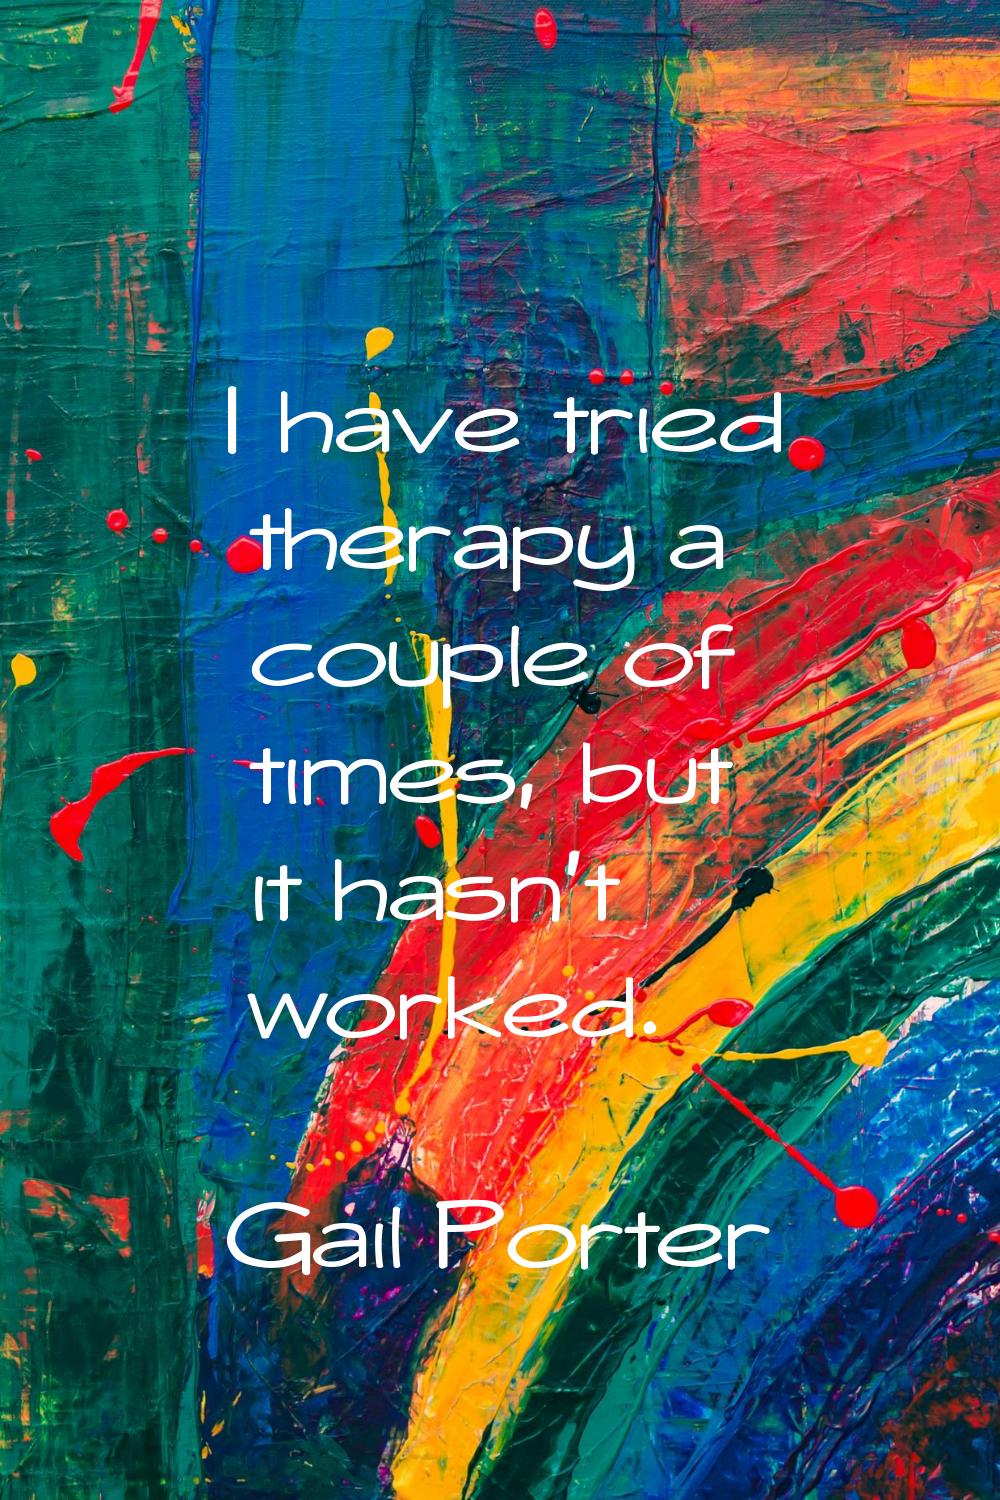 I have tried therapy a couple of times, but it hasn't worked.